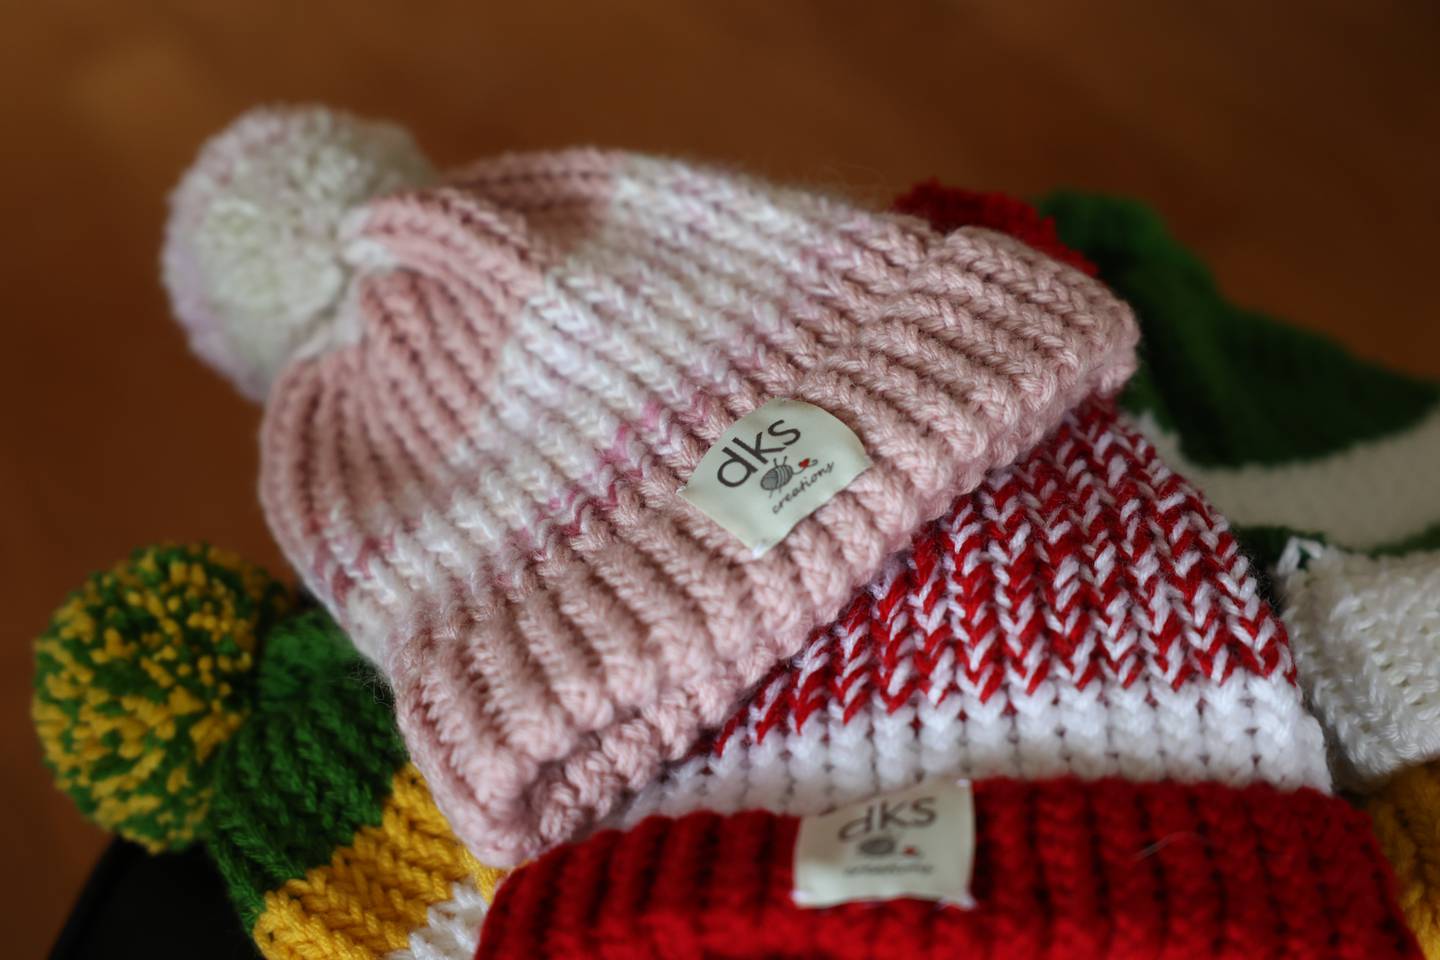 Dolores Spangler, 95 years old, took up knitting stocking caps during the pandemic in 202 and since has made over 400 hats, that she gives away in exchange for a photo wearing her work.